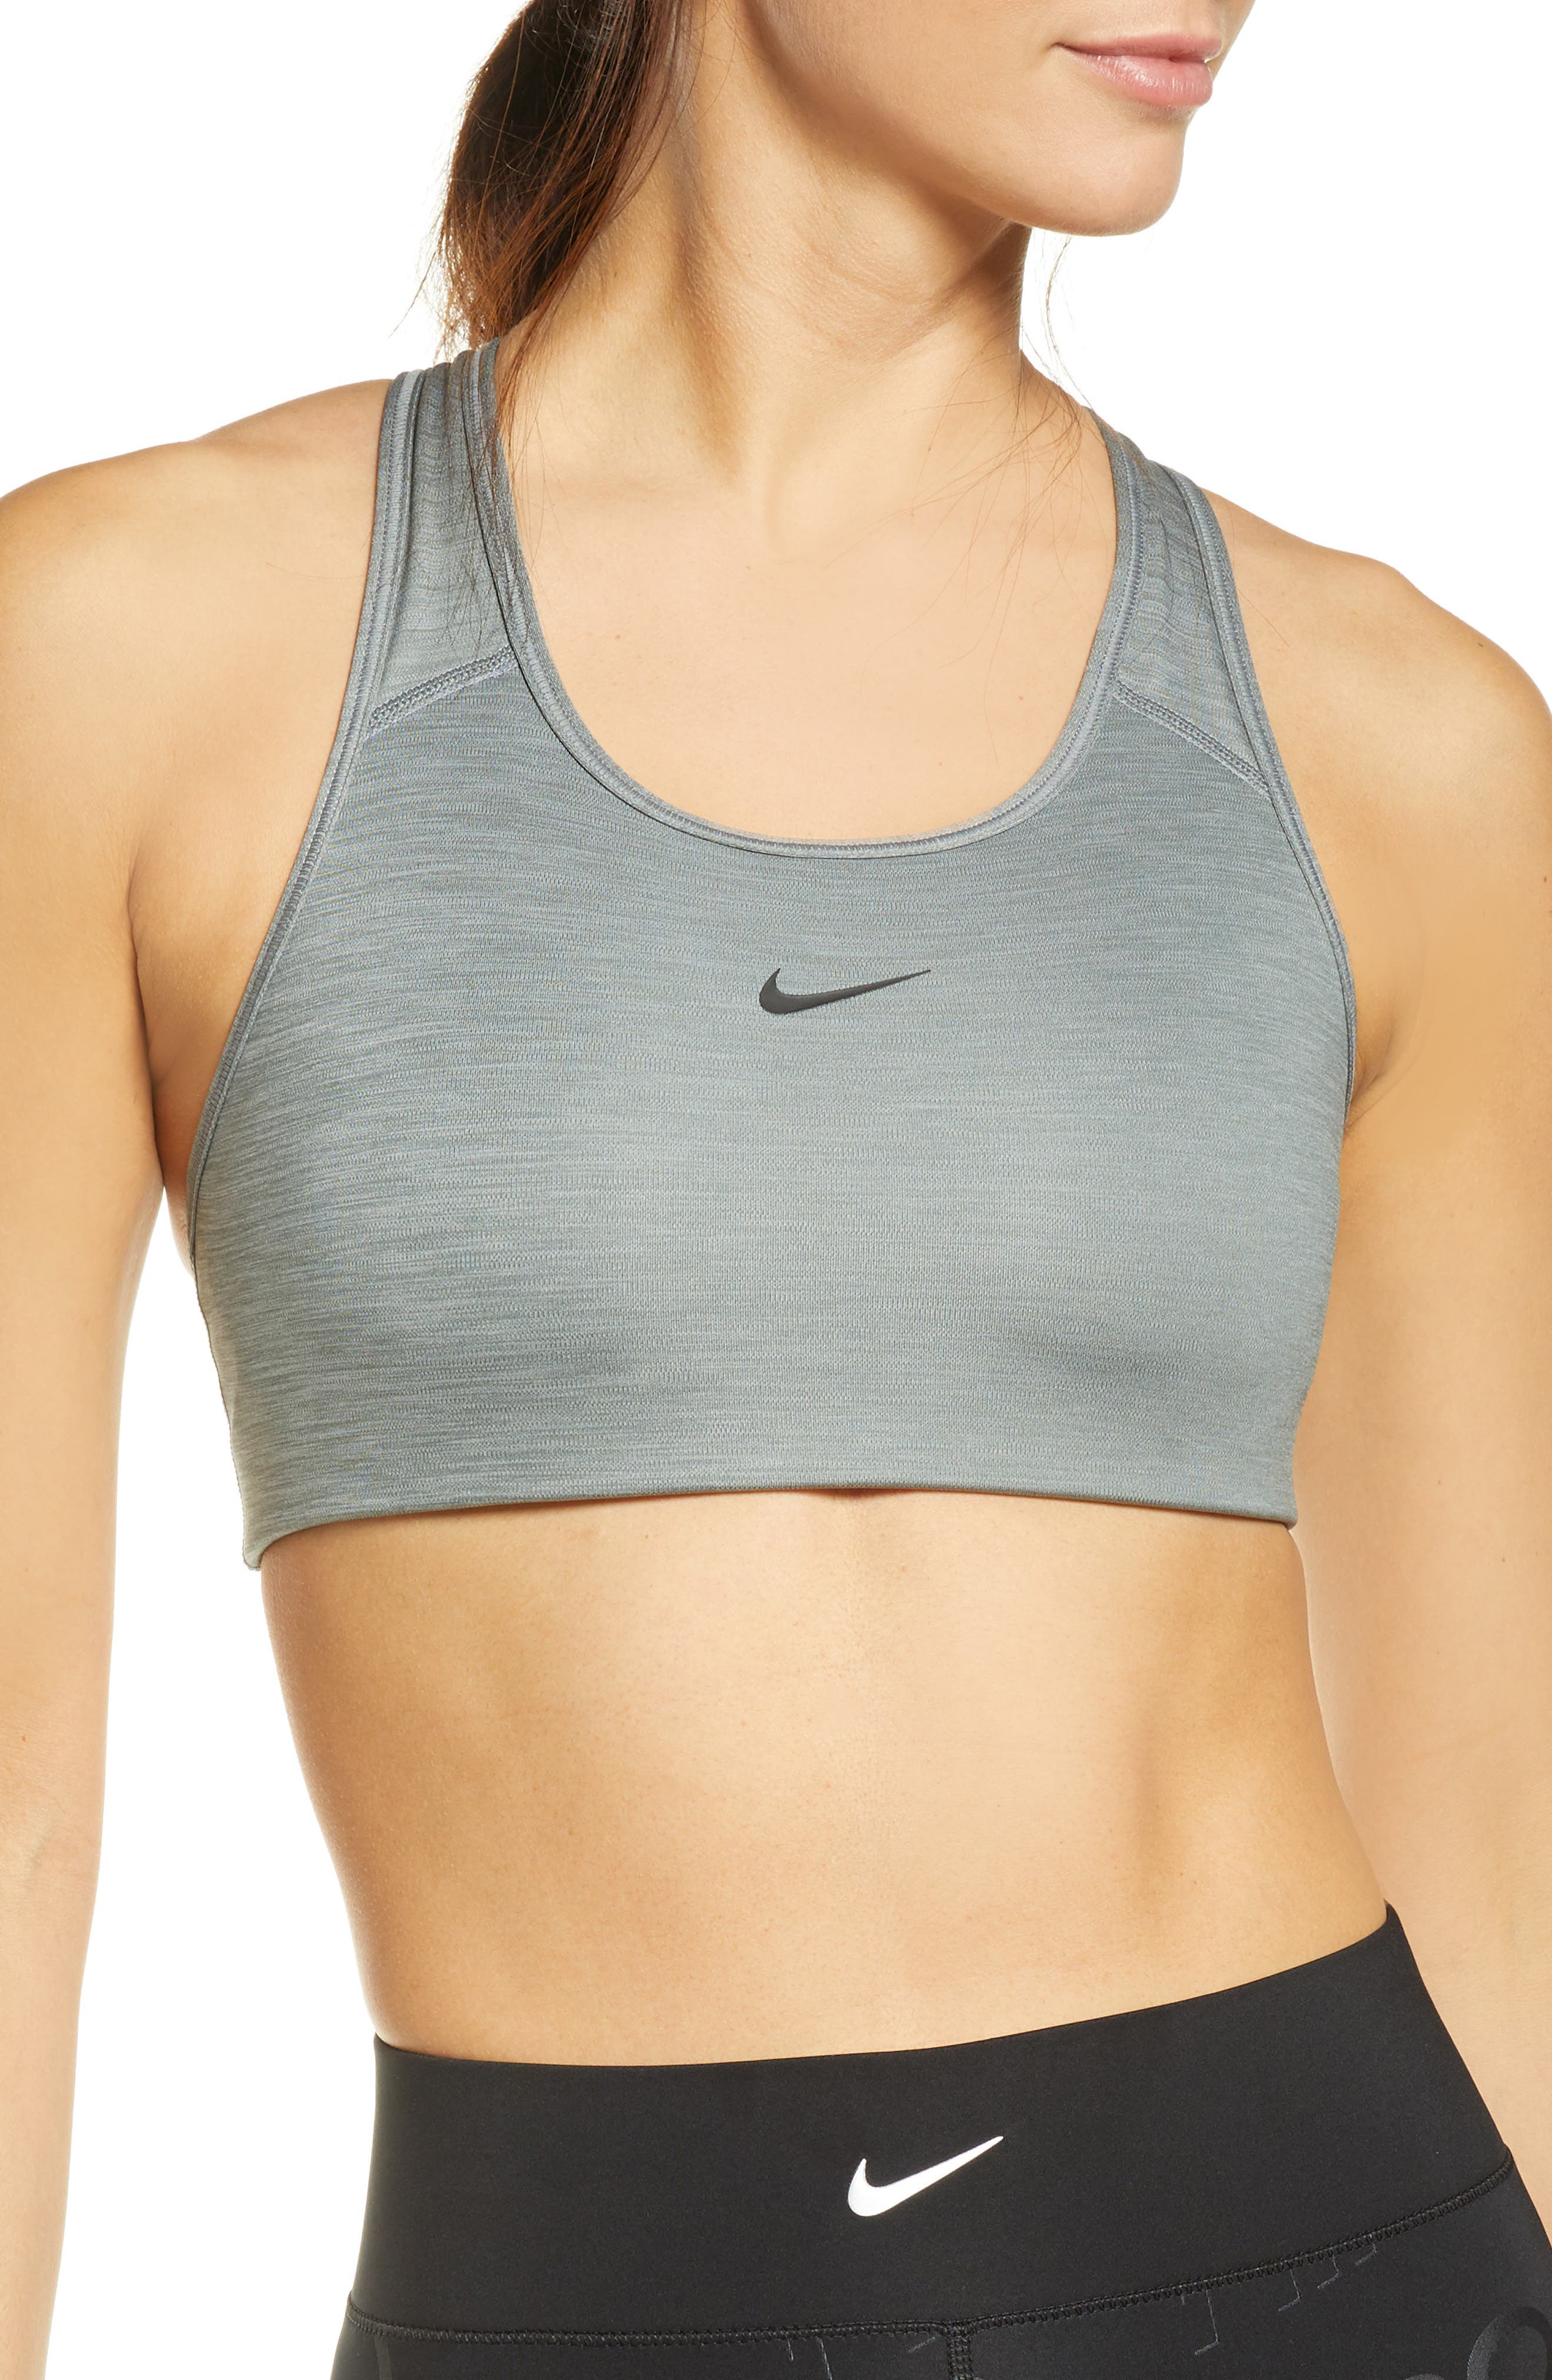 15 Best Sports Bras 2023, Game-Changing Sports Bras to Add to Your